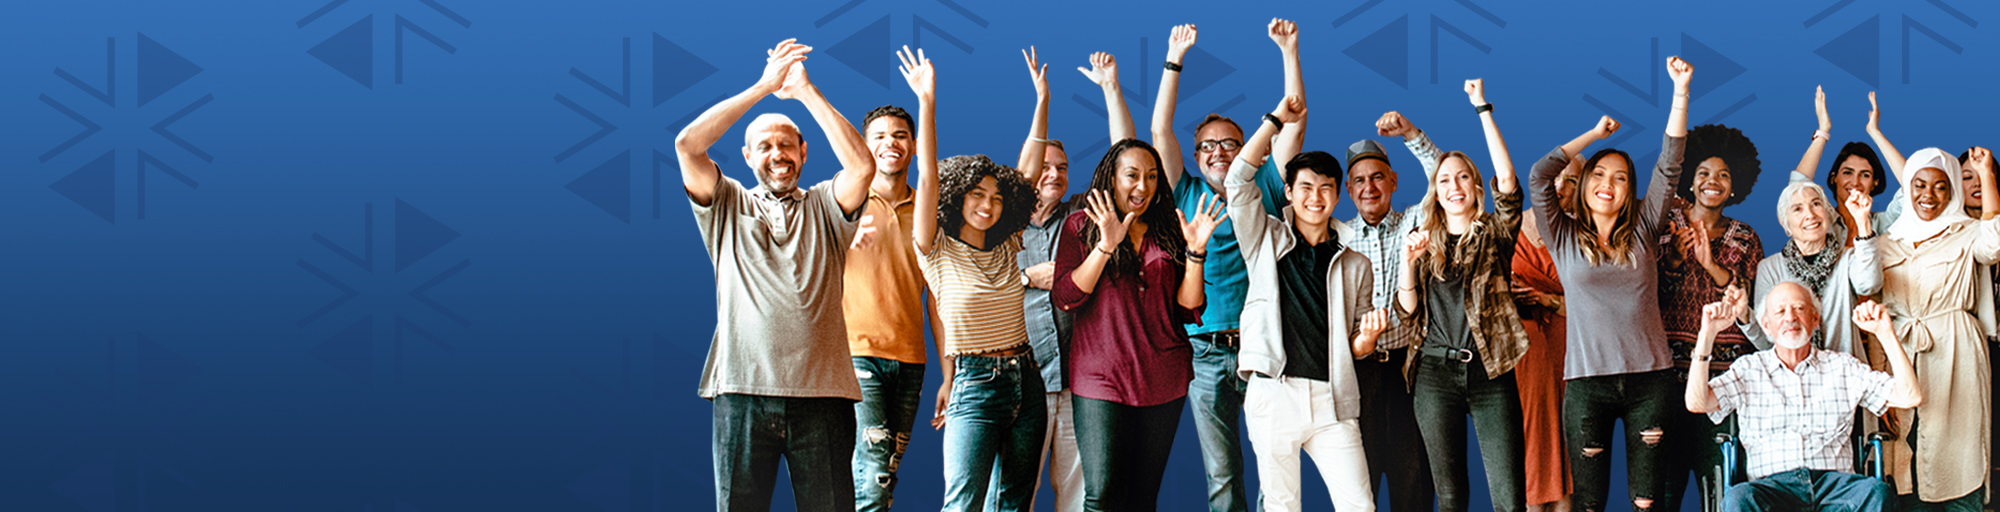 A diverse group of people in front of a blue background with their arms raised in celebration.